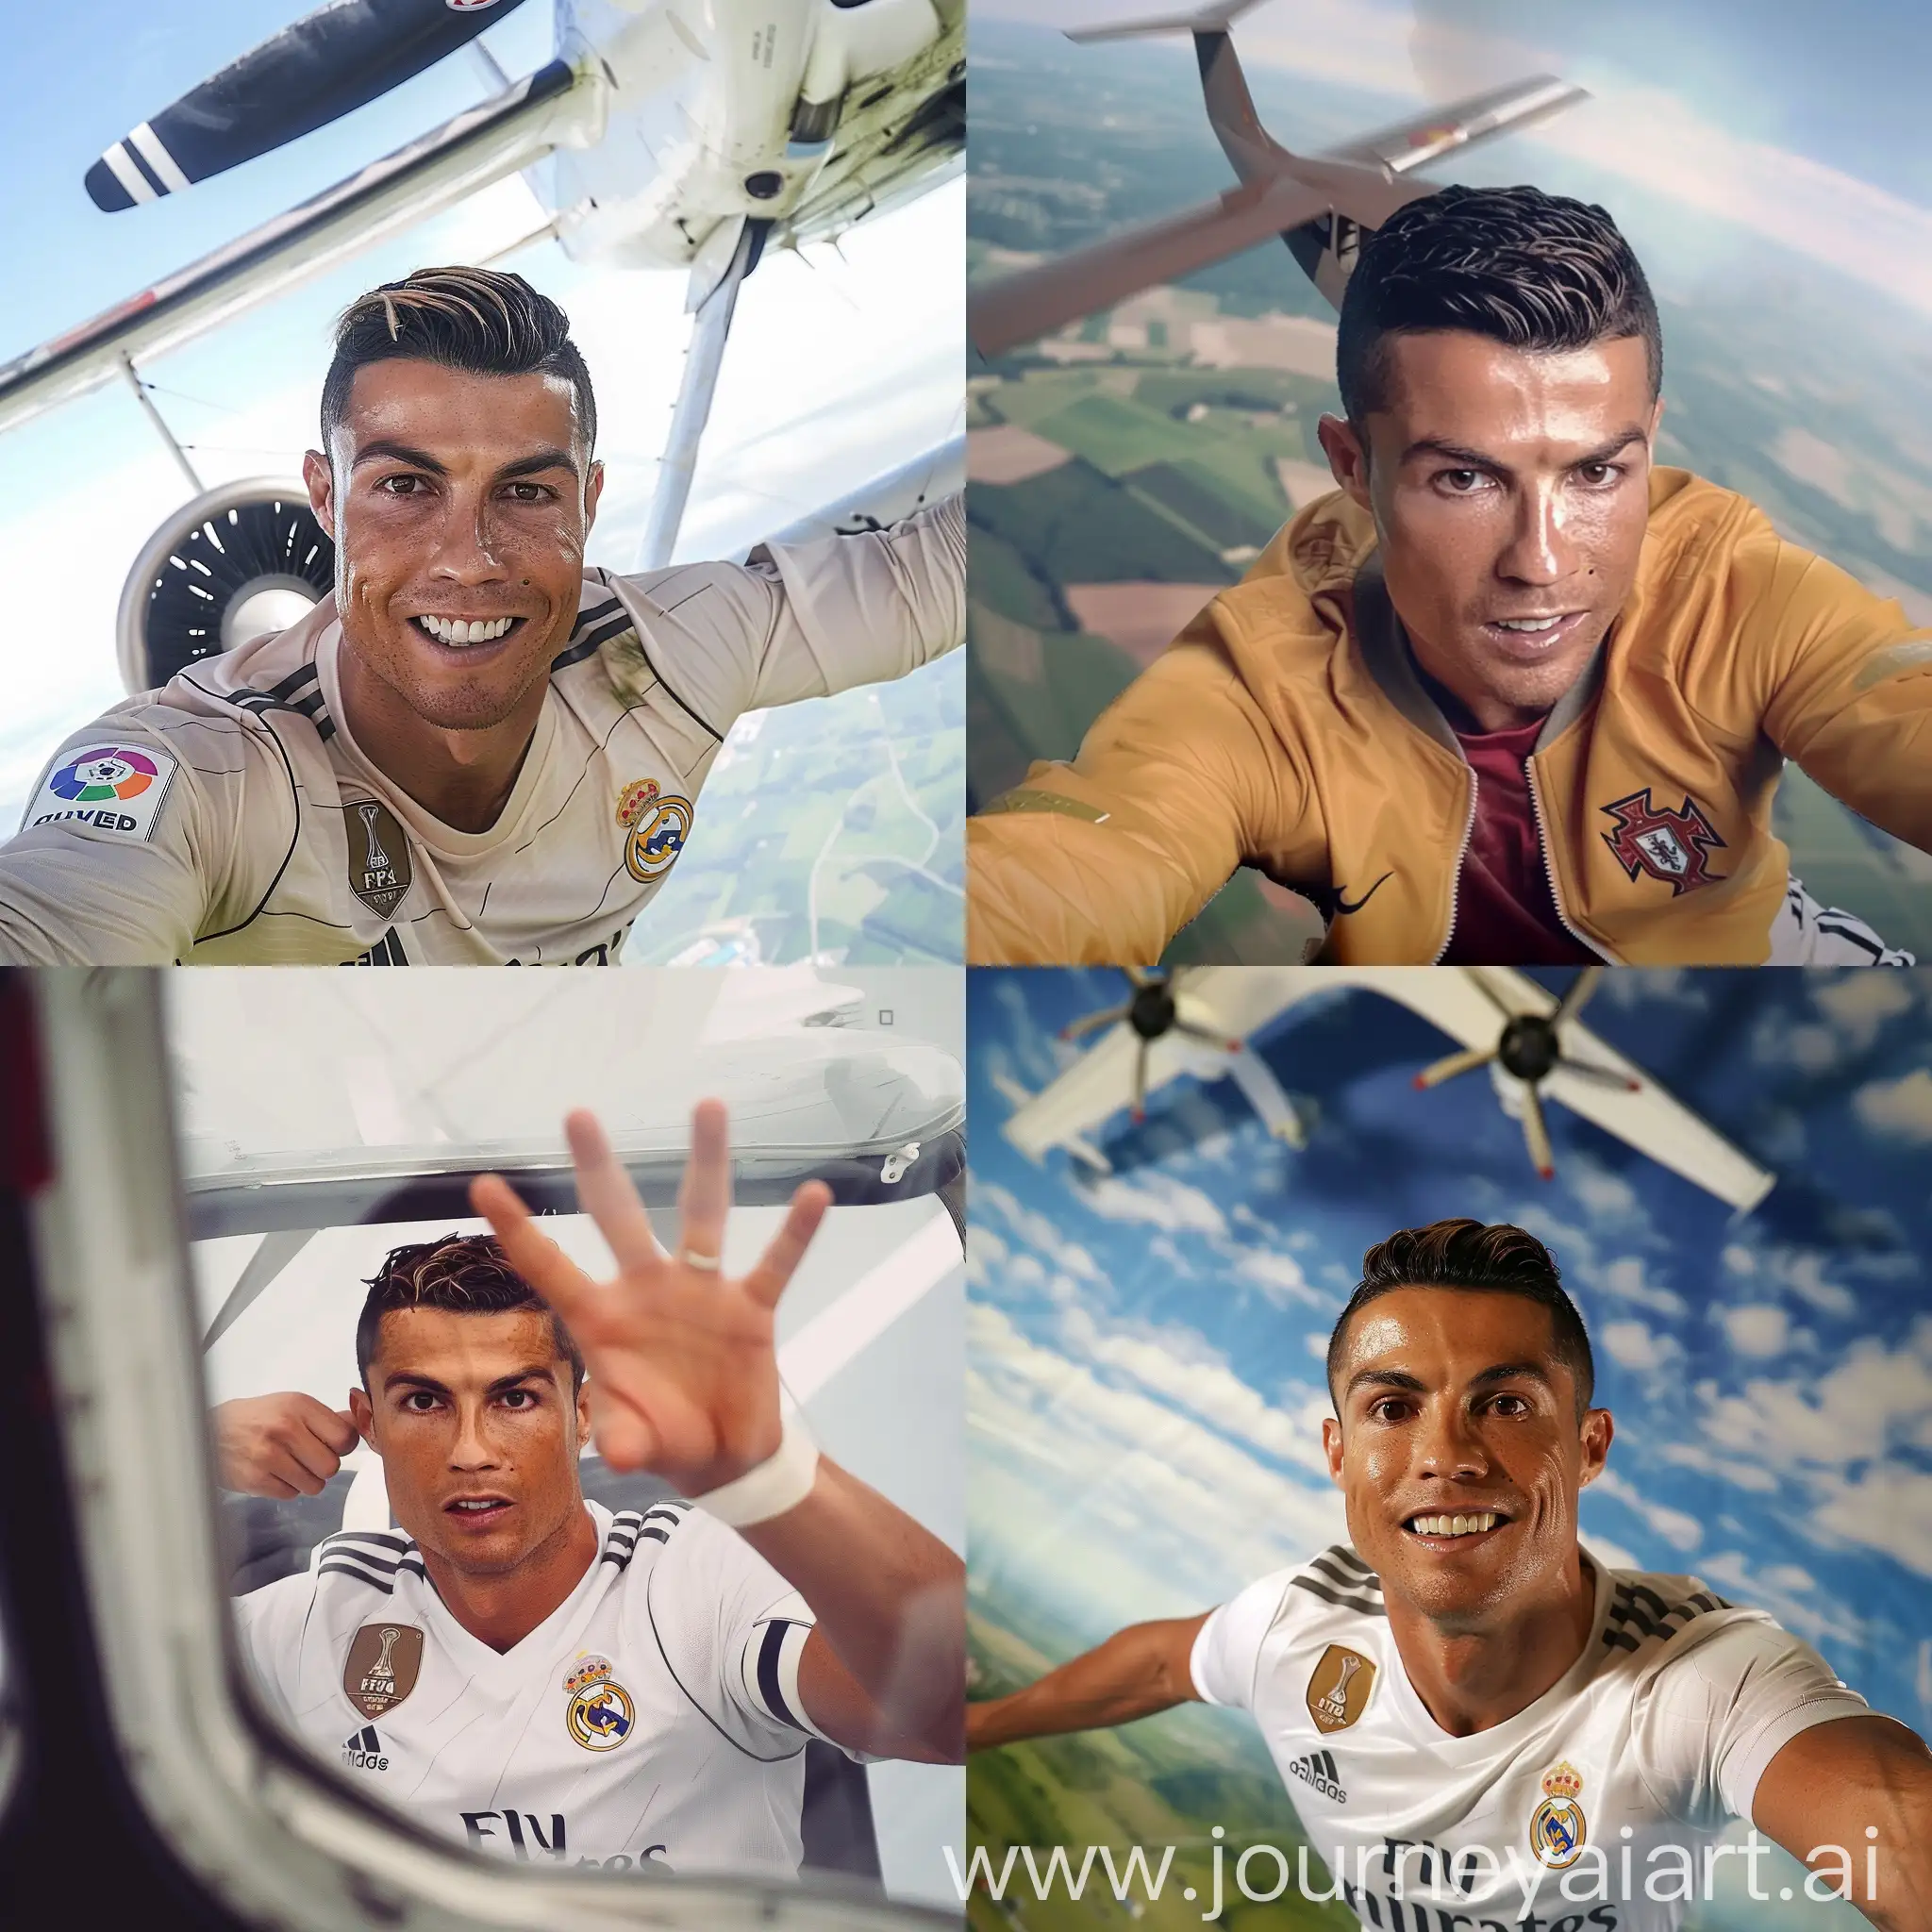 Cristiano-Ronaldo-Captures-Selfie-in-Flight-with-Realistic-Flying-Effect